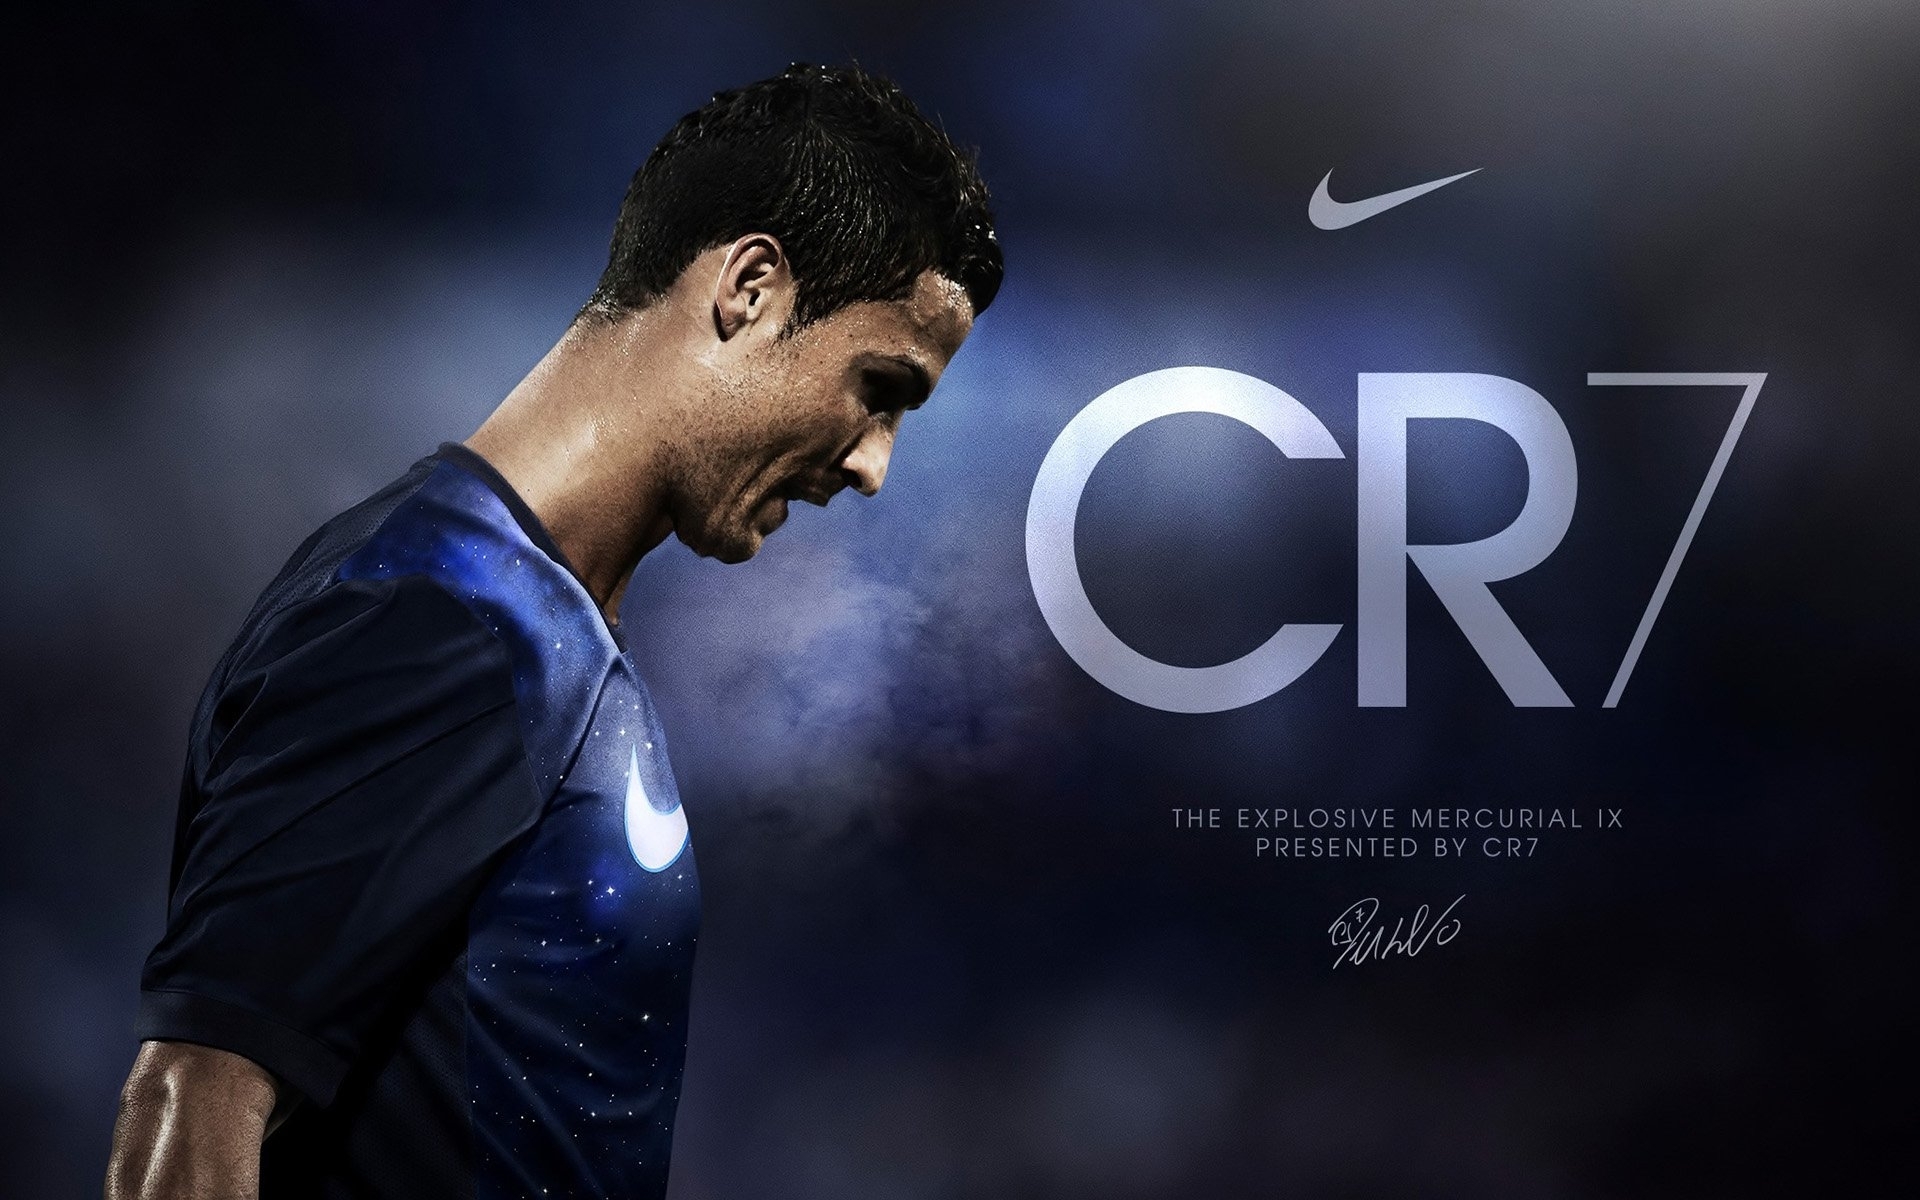 10 Best Wallpapers De Cristiano Ronaldo FULL HD 1080p For PC Background